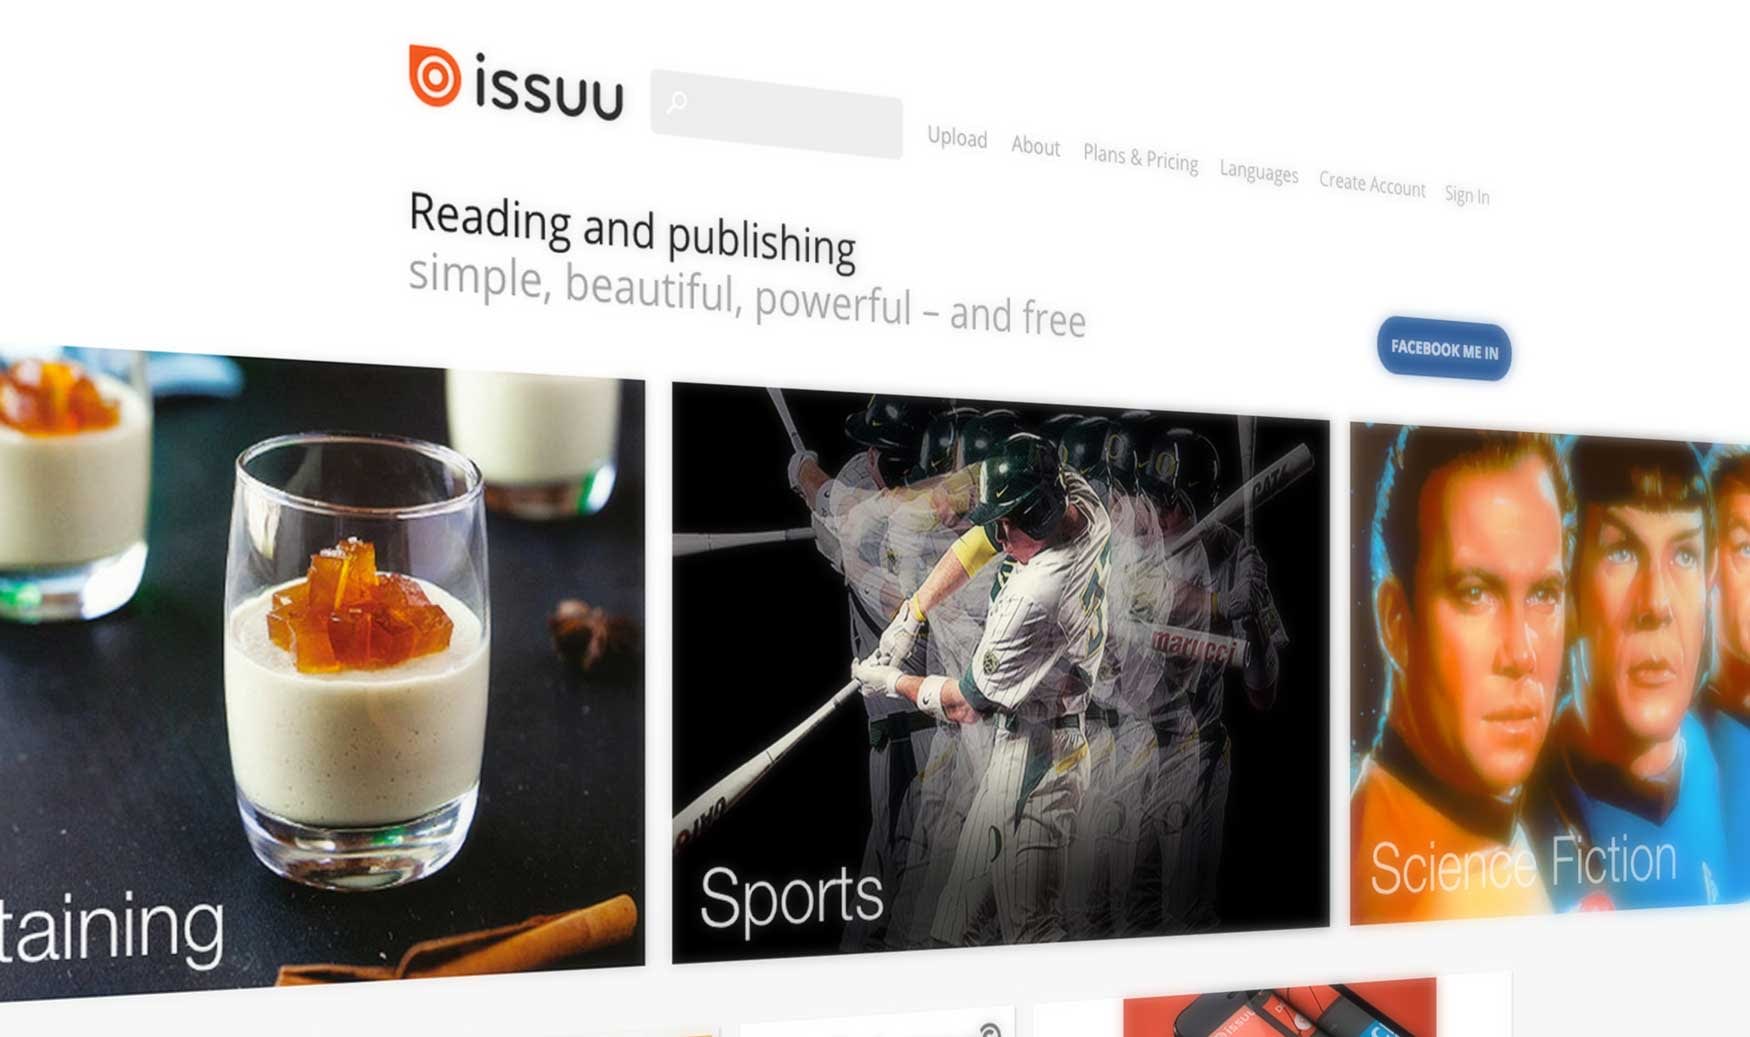 issuu features